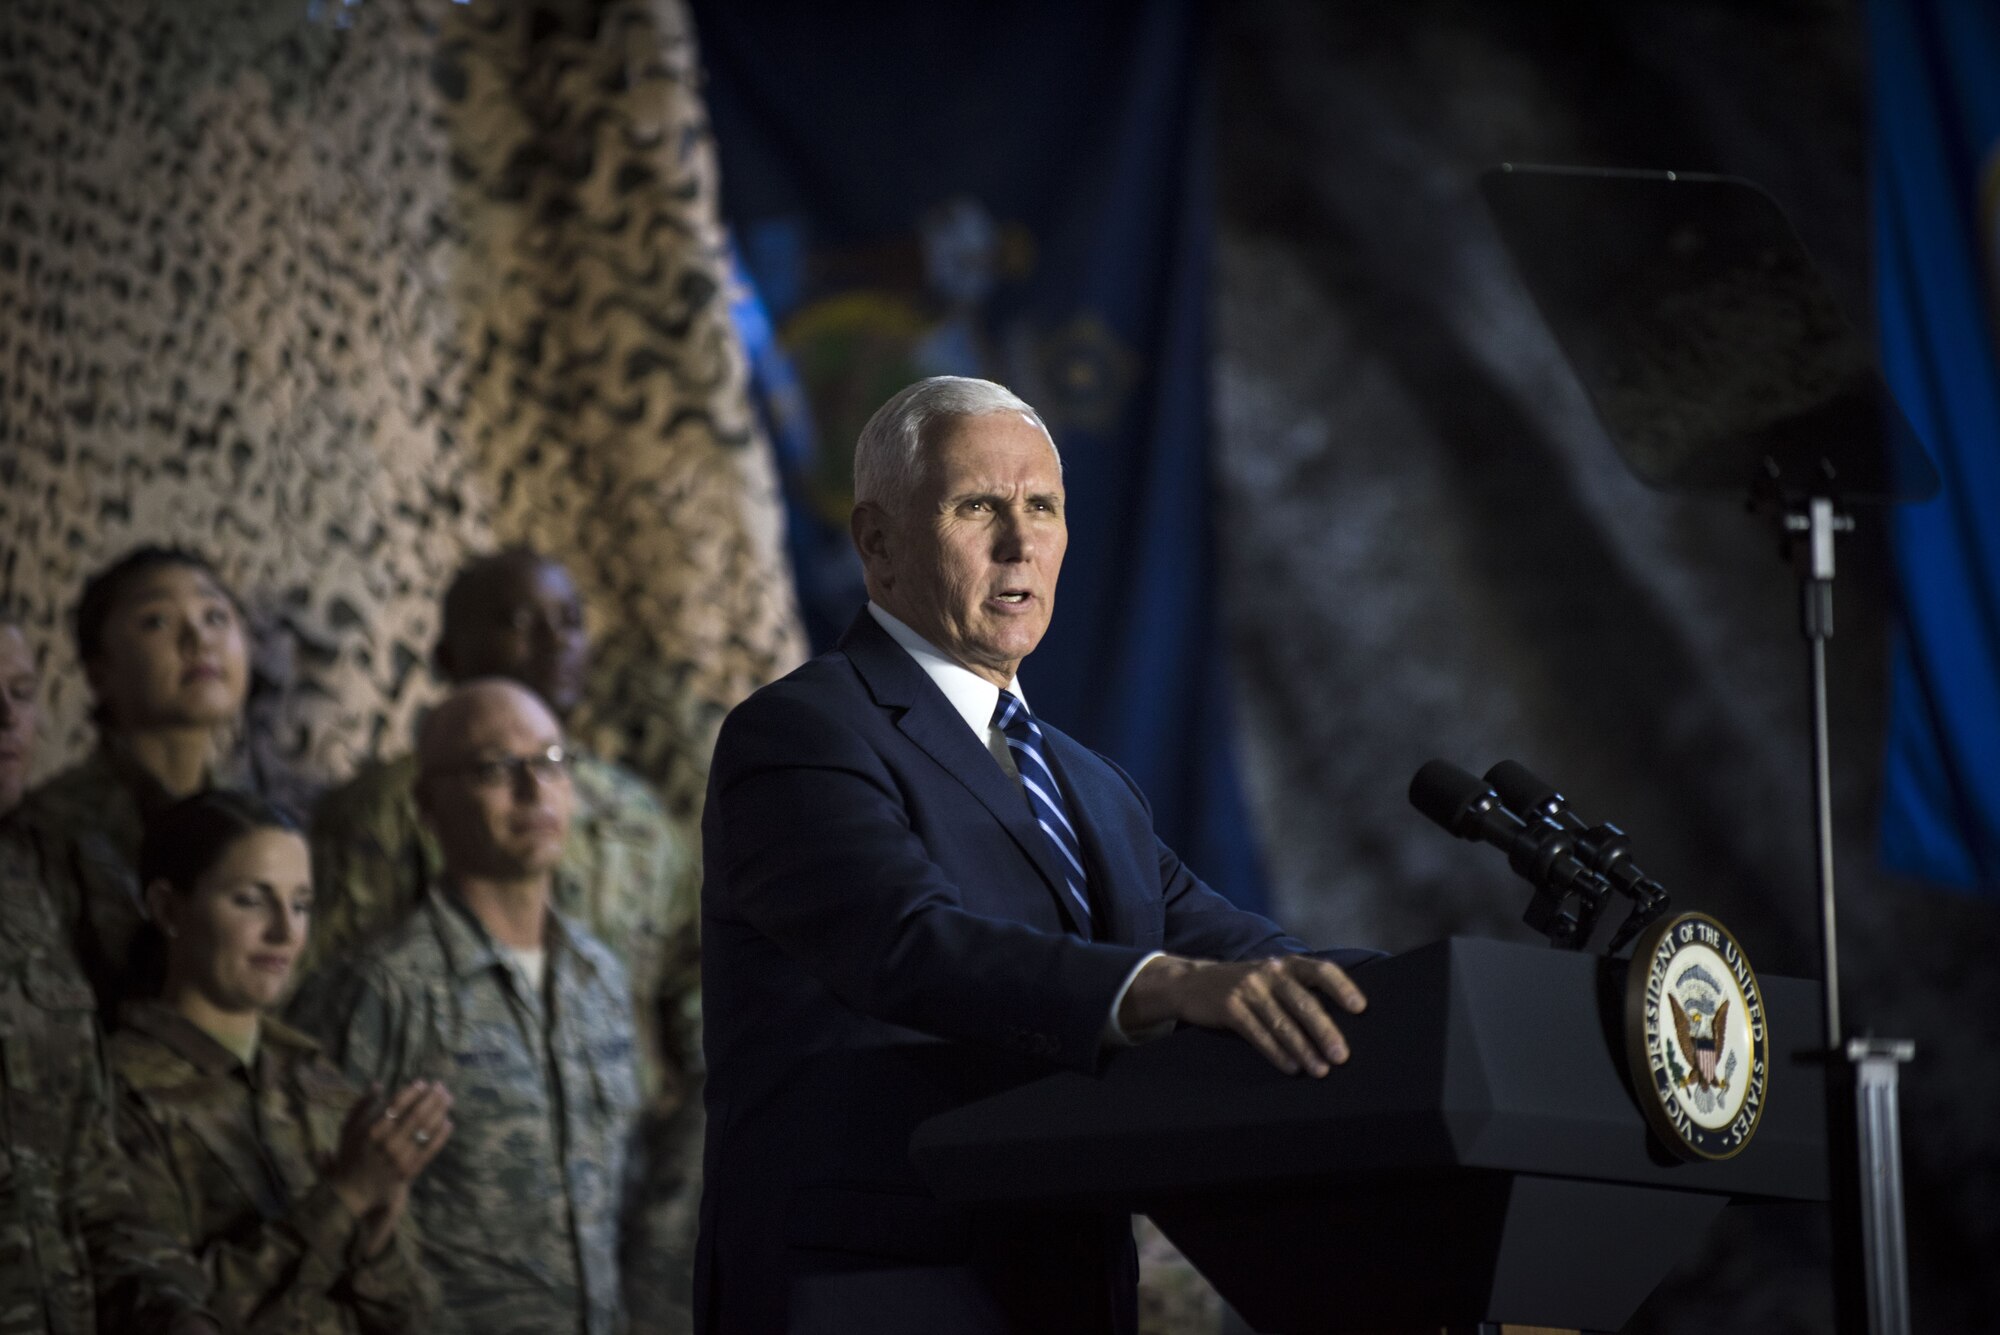 U.S. Vice President Mike Pence speaks to a crowd of deployed service members assigned to the 332d Air Expeditionary Wing January 21, 2018 at an undisclosed location in Southwest Asia. Pence visited the installation to thank service members for their continued efforts and receive briefings on recent progress in the fight against remaining Islamic State forces in the region. (U.S. Air Force photo by Staff Sgt. Joshua Kleinholz)